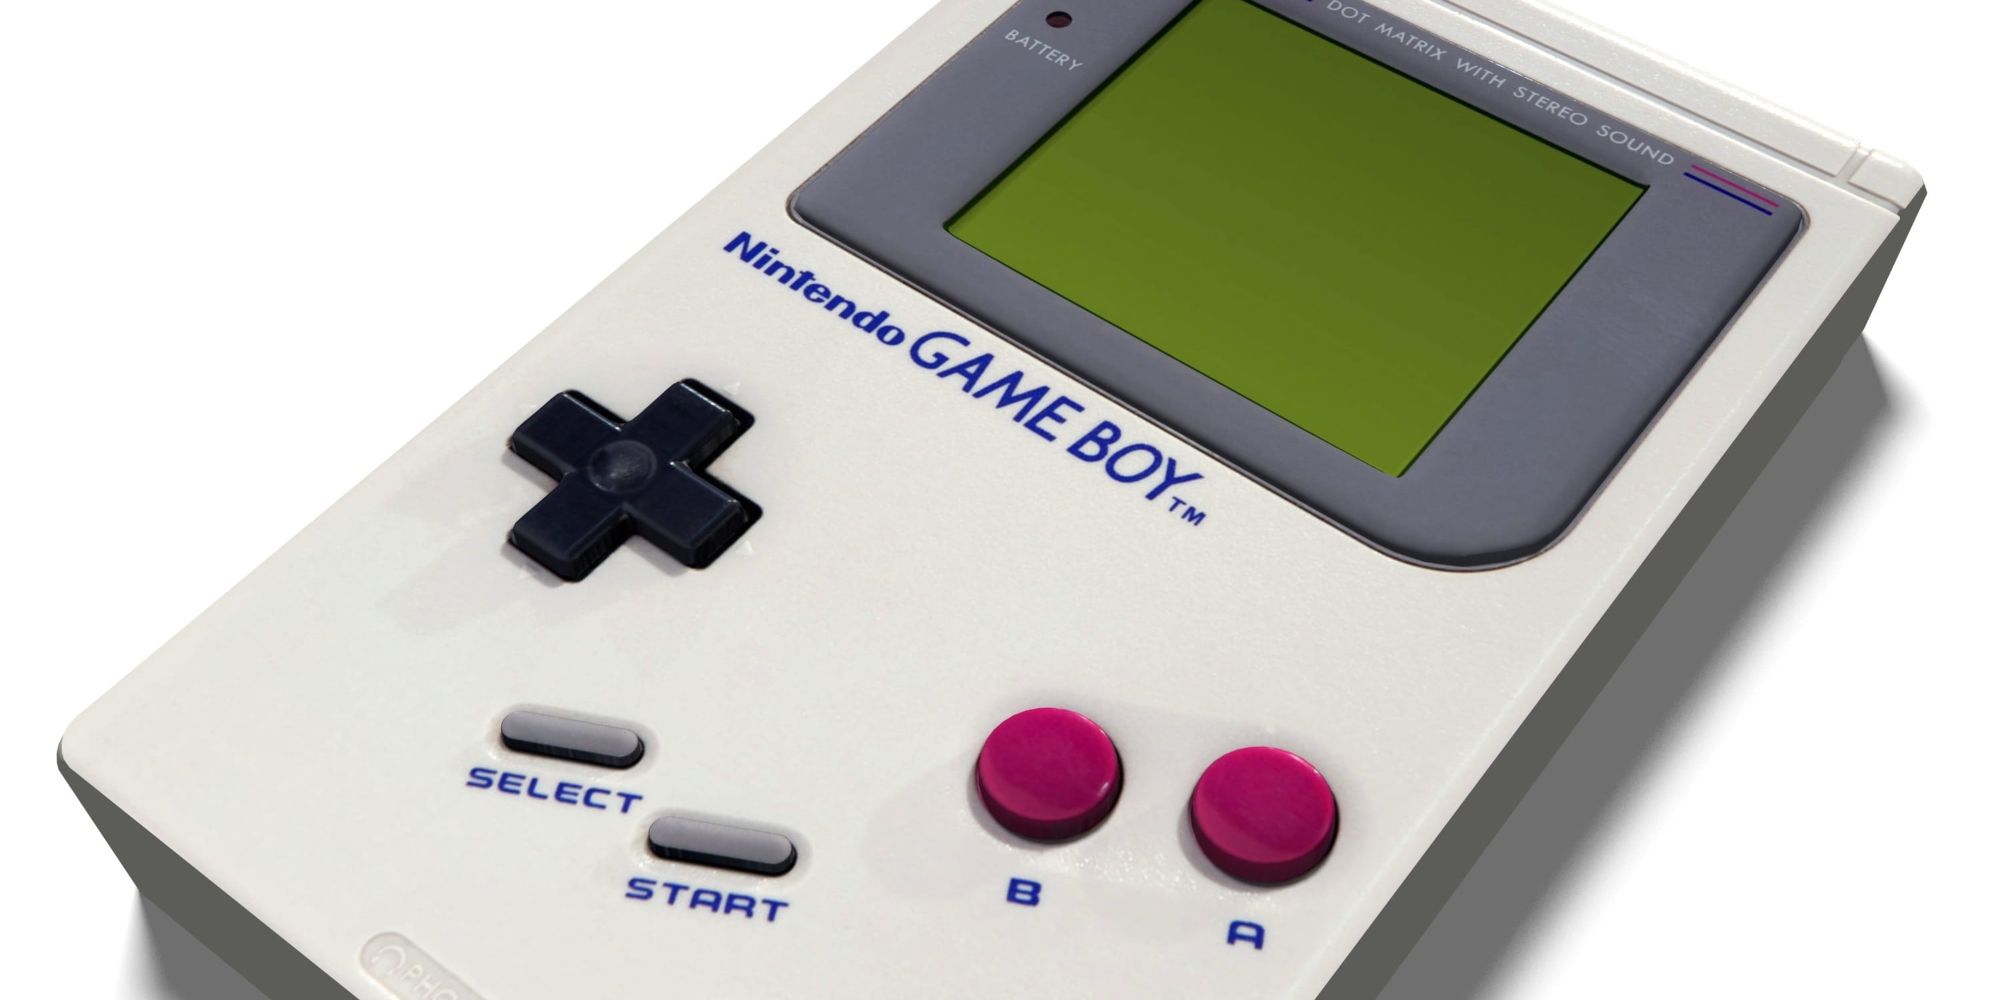 Nintendo Game Boy from 1989